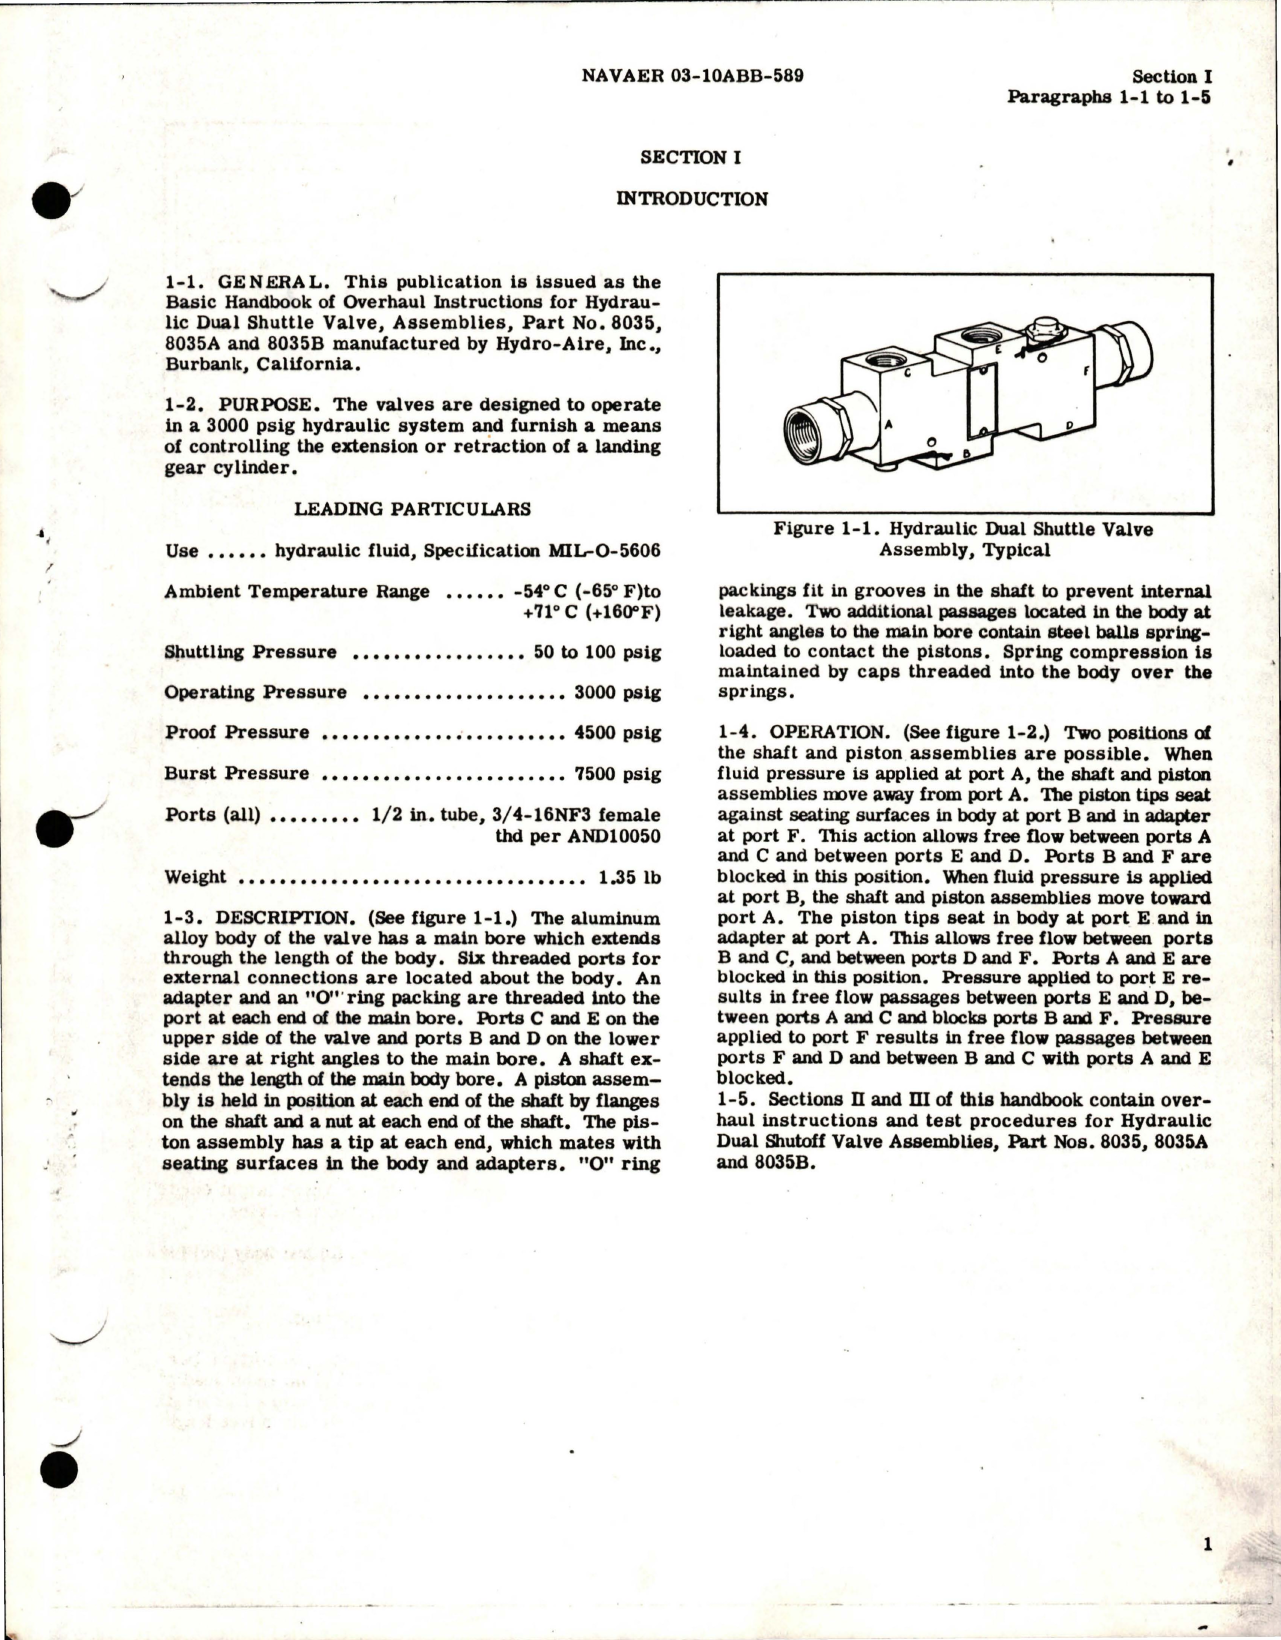 Sample page 5 from AirCorps Library document: Overhaul Instructions for Hydraulic Dual Shuttle Valve Assembly - Parts 8035, 8035A, 8035B